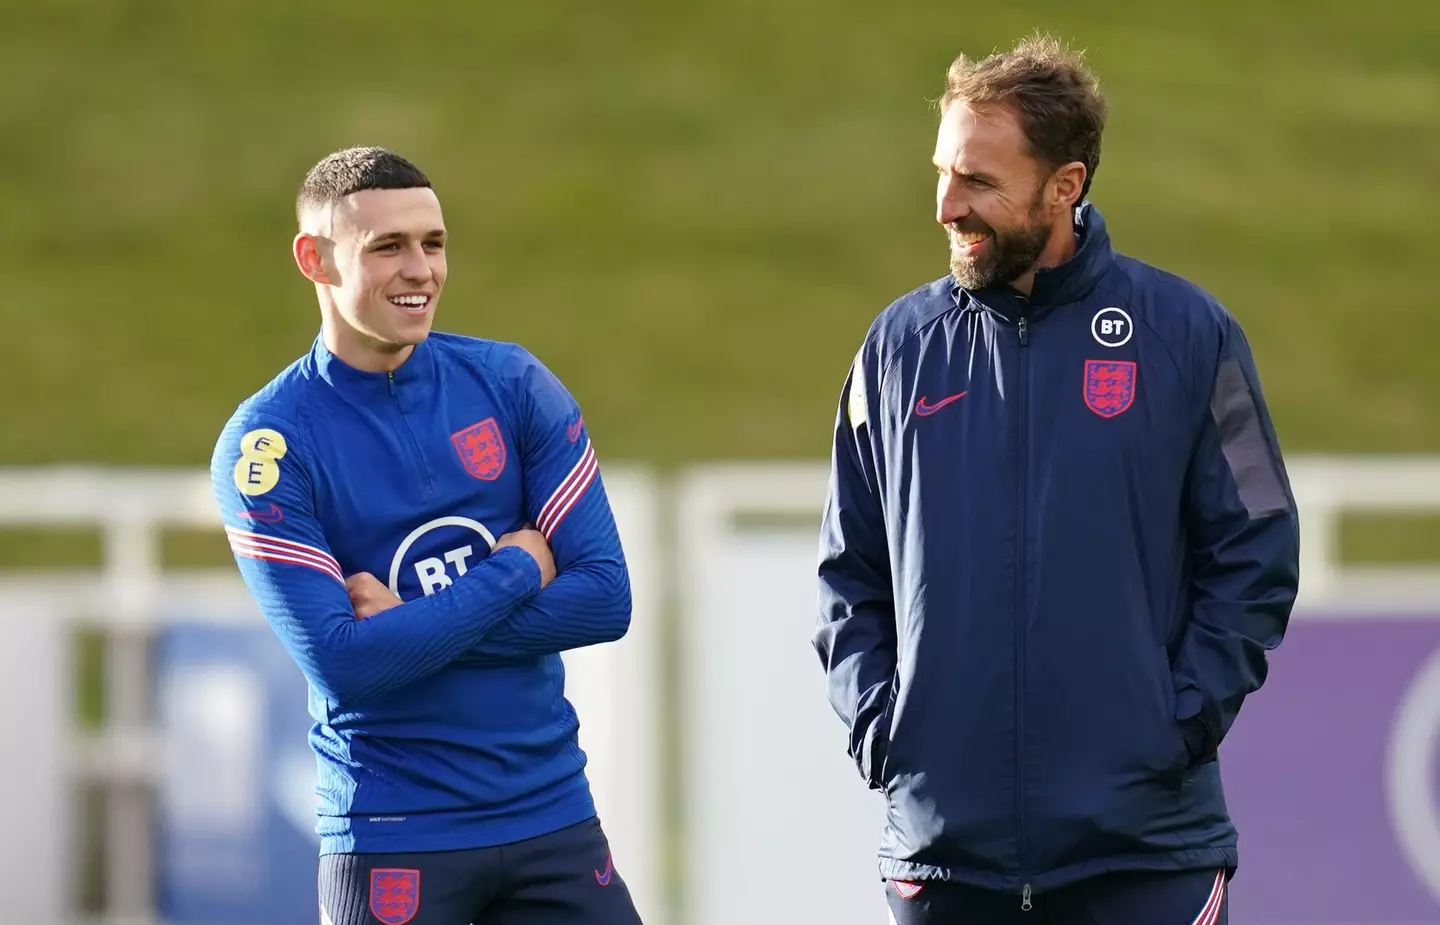 Foden and Southgate in England training last year. (Image